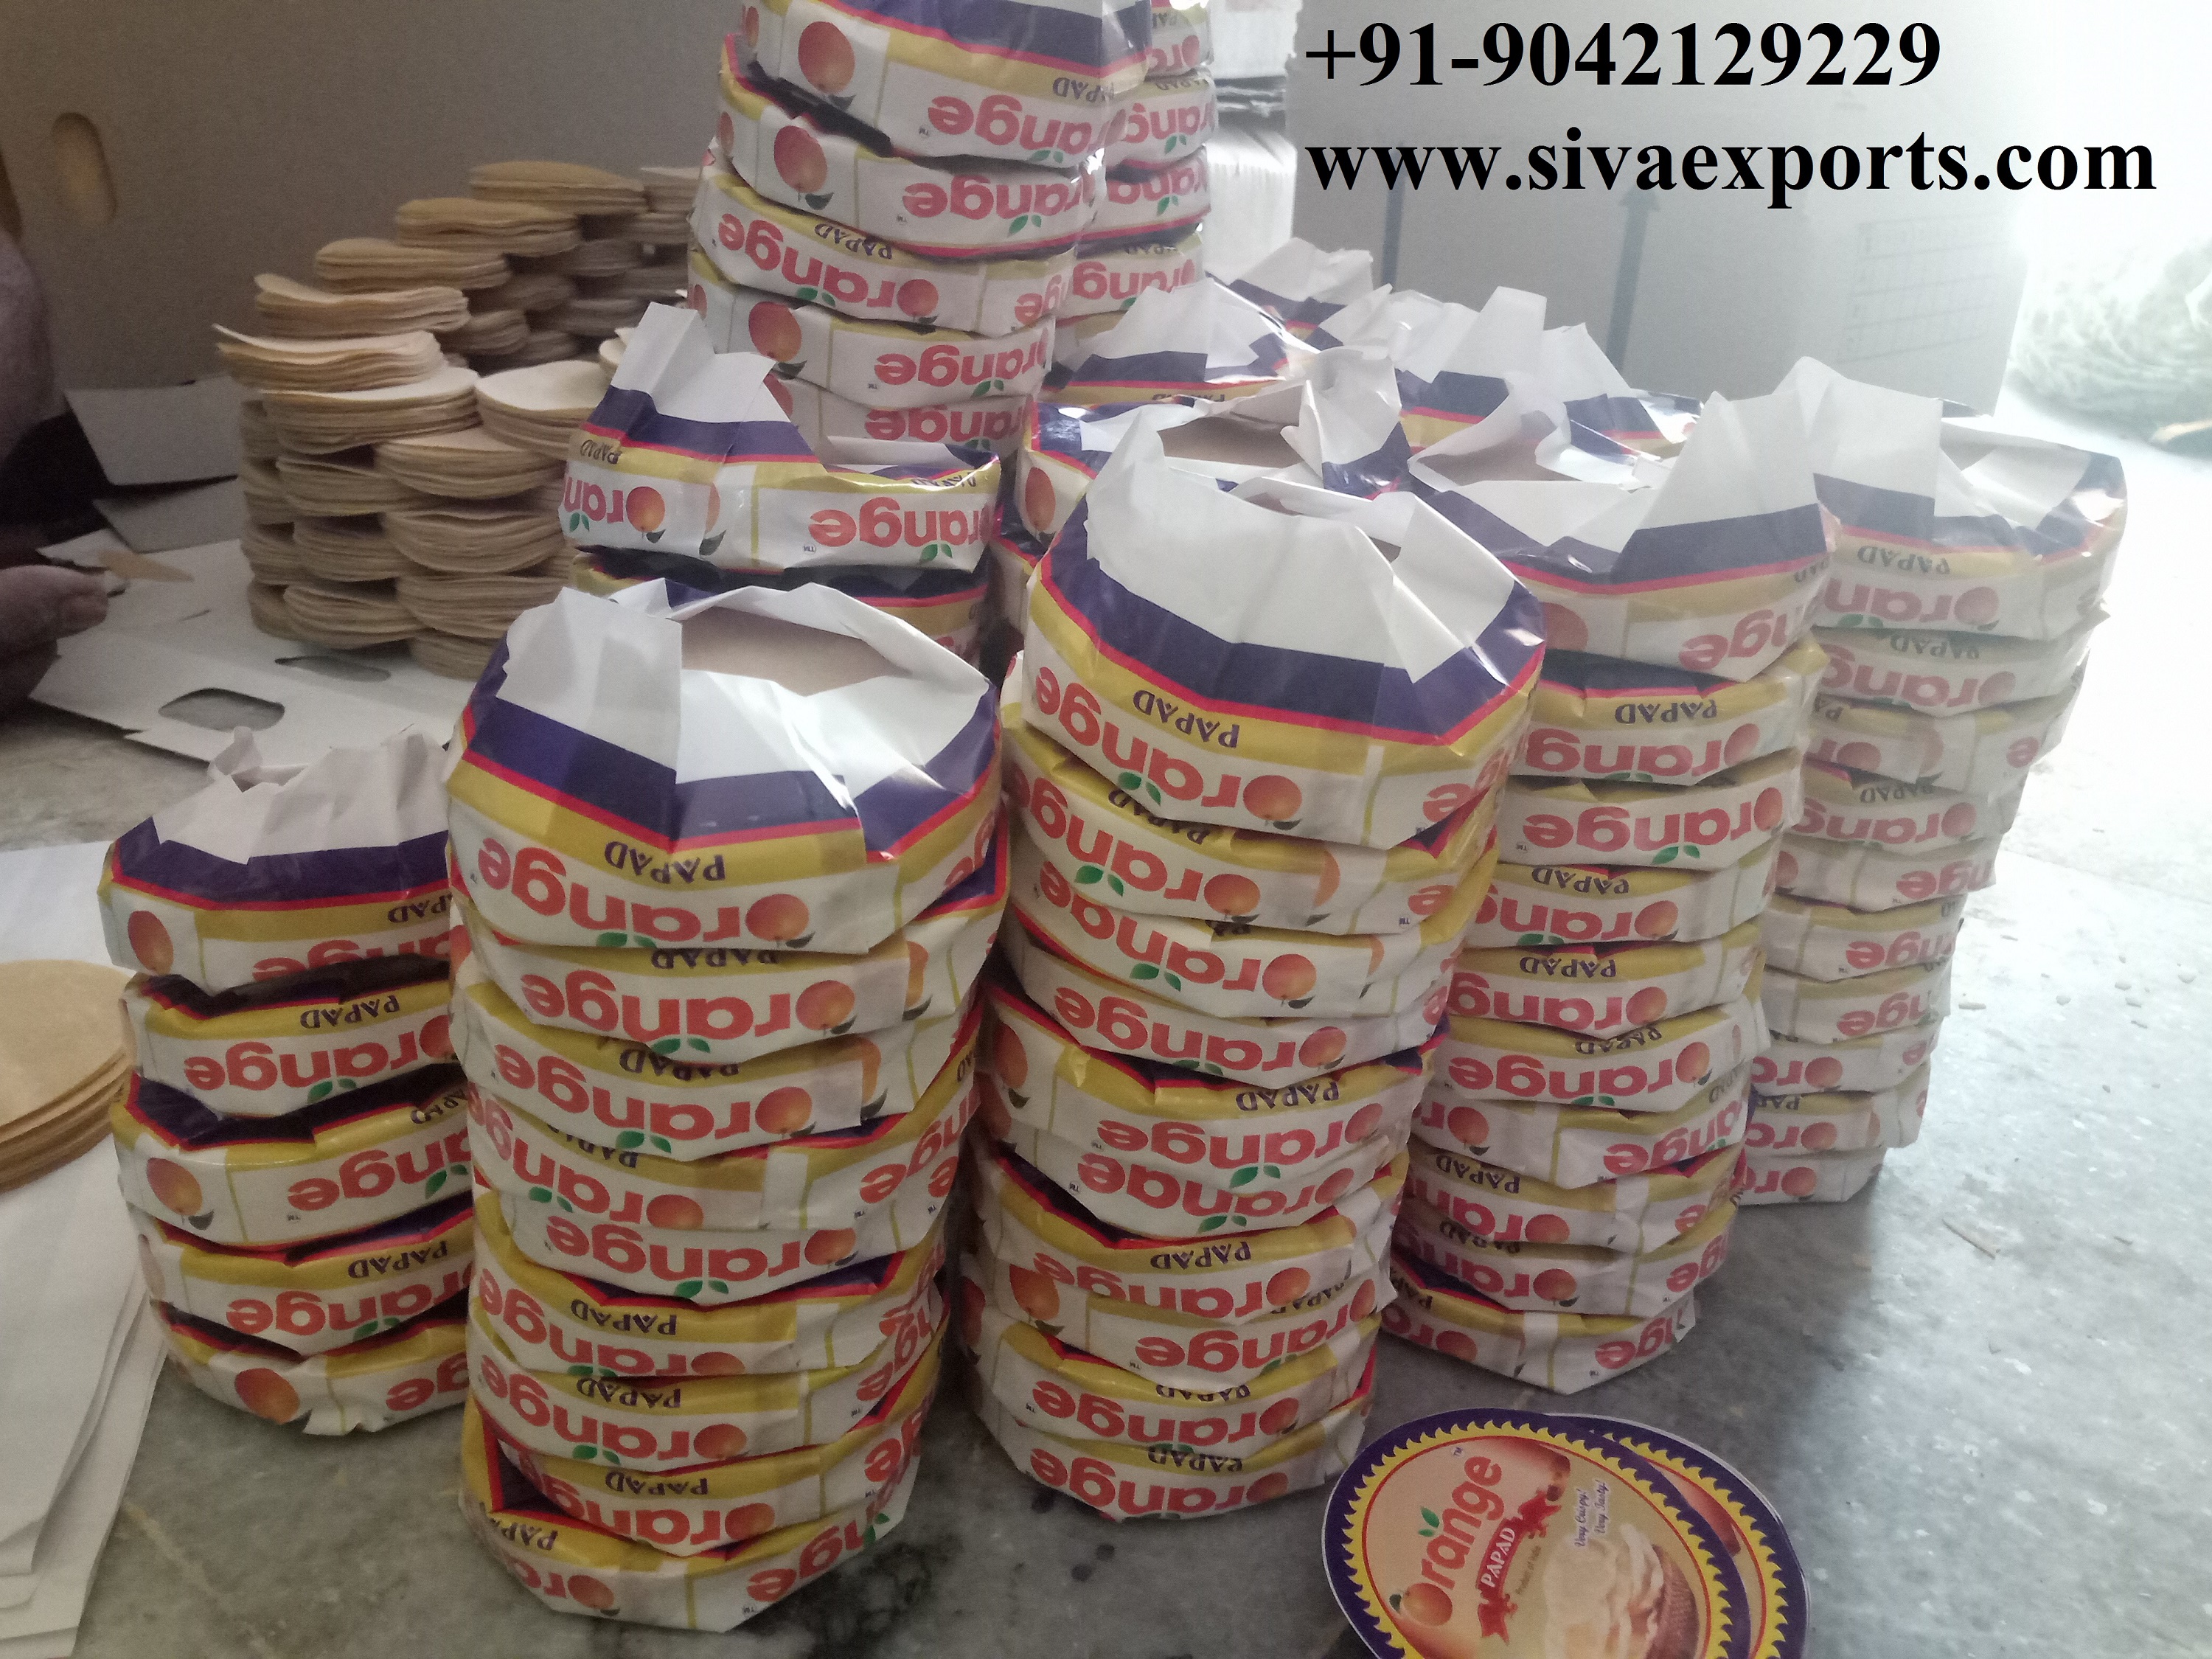 appalam manufacturers in india, papad manufacturers in india, appalam manufacturers in tamilnadu, papad manufacturers in tamilnadu, appalam manufacturers in madurai, papad manufacturers in madurai, appalam exporters in india, papad exporters in india, appalam exporters in tamilnadu, papad exporters in tamilnadu, appalam exporters in madurai, papad exporters in madurai, appalam wholesalers in india, papad wholesalers in india, appalam wholesalers in tamilnadu, papad wholesalers in tamilnadu, appalam wholesalers in madurai, papad wholesalers in madurai, appalam distributors in india, papad distributors in india, appalam distributors in tamilnadu, papad distributors in tamilnadu, appalam distributors in madurai, papad distributors in madurai, appalam suppliers in india, papad suppliers in india, appalam suppliers in tamilnadu, papad suppliers in tamilnadu, appalam suppliers in madurai, papad suppliers in madurai, appalam dealers in india, papad dealers in india, appalam dealers in tamilnadu, papad dealers in tamilnadu, appalam dealers in madurai, papad dealers in madurai, appalam companies in india, appalam companies in tamilnadu, appalam companies in madurai, papad companies in india, papad companies in tamilnadu, papad companies in madurai, appalam company in india, appalam company in tamilnadu, appalam company in madurai, papad company in india, papad company in tamilnadu, papad company in madurai, appalam factory in india, appalam factory in tamilnadu, appalam factory in madurai, papad factory in india, papad factory in tamilnadu, papad factory in madurai, appalam factories in india, appalam factories in tamilnadu, appalam factories in madurai, papad factories in india, papad factories in tamilnadu, papad factories in madurai, appalam production units in india, appalam production units in tamilnadu, appalam production units in madurai, papad production units in india, papad production units in tamilnadu, papad production units in madurai, pappadam manufacturers in india, poppadom manufacturers in india, pappadam manufacturers in tamilnadu, poppadom manufacturers in tamilnadu, pappadam manufacturers in madurai, poppadom manufacturers in madurai, appalam manufacturers, papad manufacturers, pappadam manufacturers, pappadum exporters in india, pappadam exporters in india, poppadom exporters in india, pappadam exporters in tamilnadu, pappadum exporters in tamilnadu, poppadom exporters in tamilnadu, pappadum exporters in madurai, pappadam exporters in madurai, poppadom exporters in Madurai, pappadum wholesalers in madurai, pappadam wholesalers in madurai, poppadom wholesalers in Madurai, pappadum wholesalers in tamilnadu, pappadam wholesalers in tamilnadu, poppadom wholesalers in Tamilnadu, pappadam wholesalers in india, poppadom wholesalers in india, pappadum wholesalers in india, appalam retailers in india, papad retailers in india, appalam retailers in tamilnadu, papad retailers in tamilnadu, appalam retailers in madurai, papad retailers in Madurai, appalam, papad, Siva Exports, Orange Appalam, Orange Papad, Lion Brand Appalam, Siva Appalam, Lion brand Papad, Sivan Appalam, Orange Pappadam, appalam, papad, papadum, papadam, papadom, pappad, pappadum, pappadam, pappadom, poppadom, popadom, poppadam, popadam, poppadum, popadum, appalam manufacturers, papad manufacturers, papadum manufacturers, papadam manufacturers, pappadam manufacturers, pappad manufacturers, pappadum manufacturers, pappadom manufacturers, poppadom manufacturers, papadom manufacturers, popadom manufacturers, poppadum manufacturers, popadum manufacturers, popadam manufacturers, poppadam manufacturers, cumin appalam, red chilli appalam, green chilli appalam, pepper appalam, garmic appalam, calcium appalam, plain appalam manufacturers in india,tamilnadu,madurai